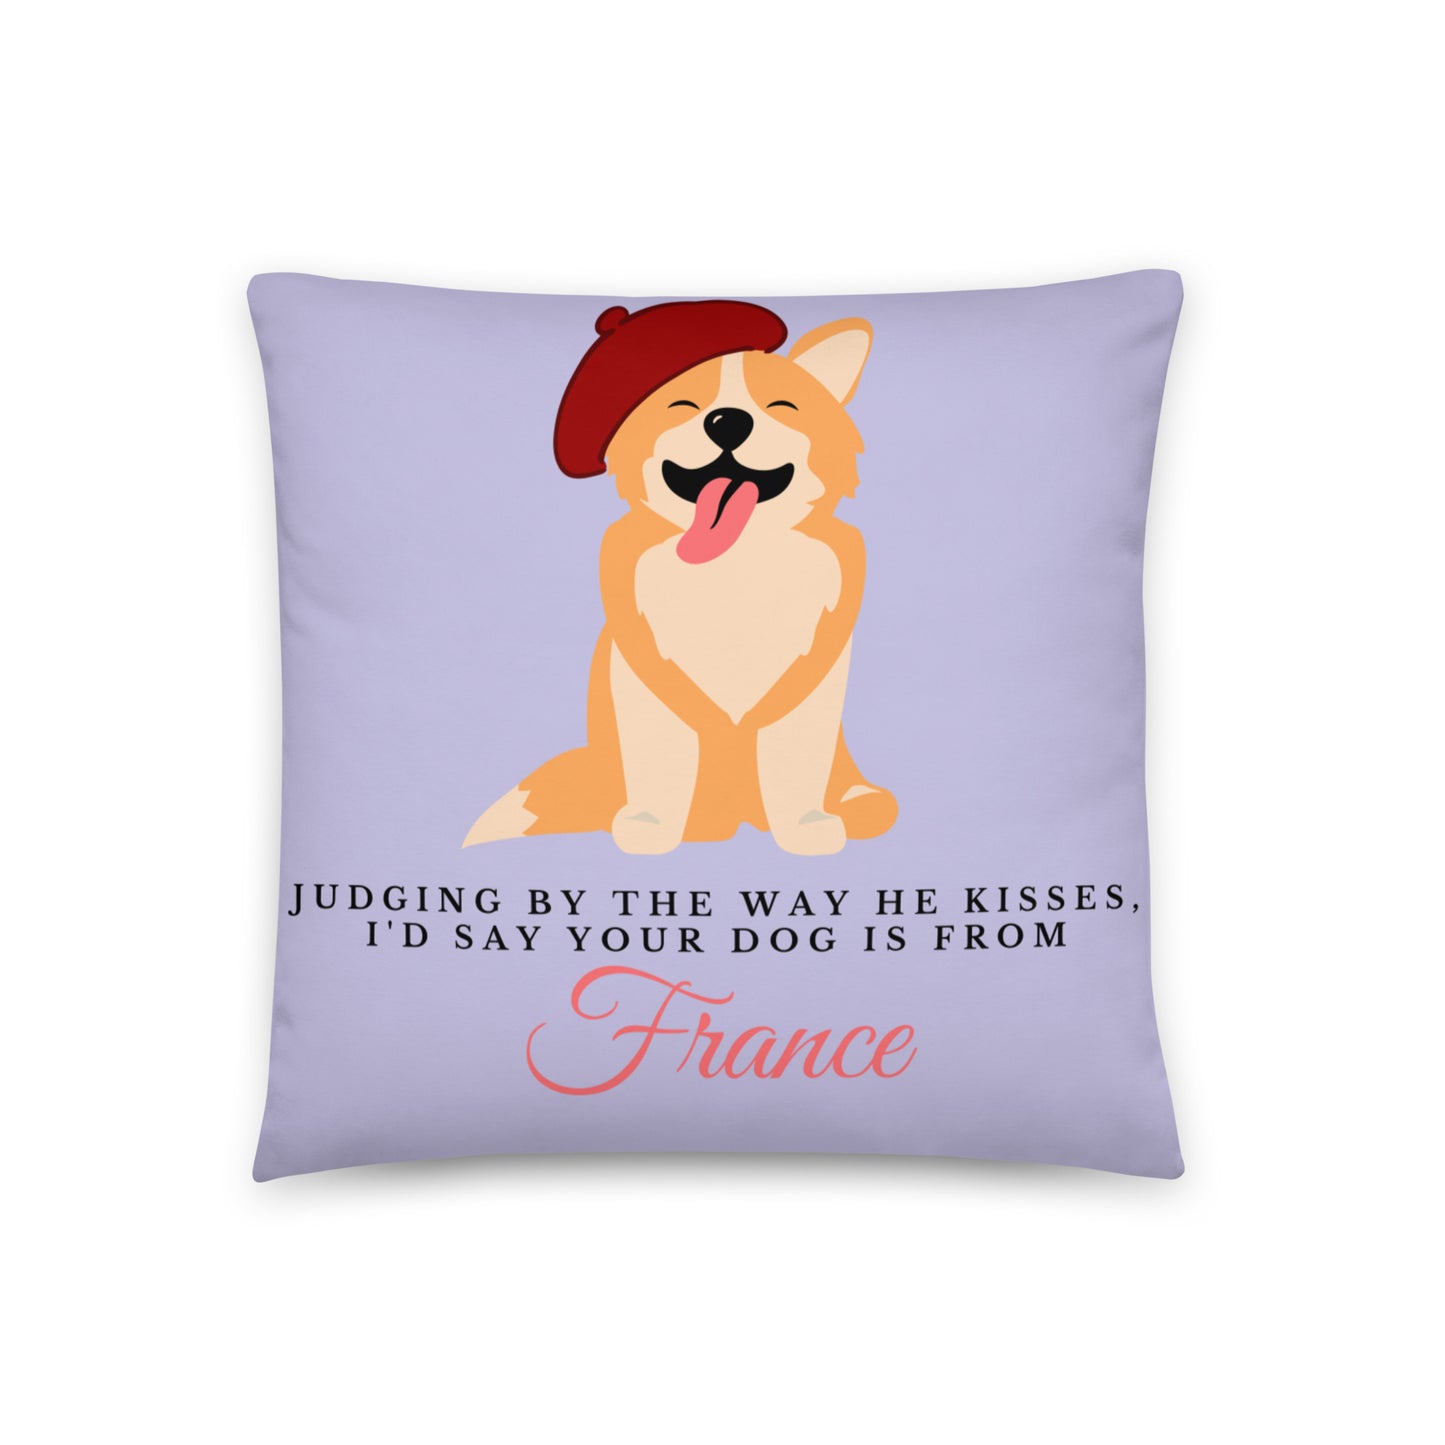 French Kisses Pillow